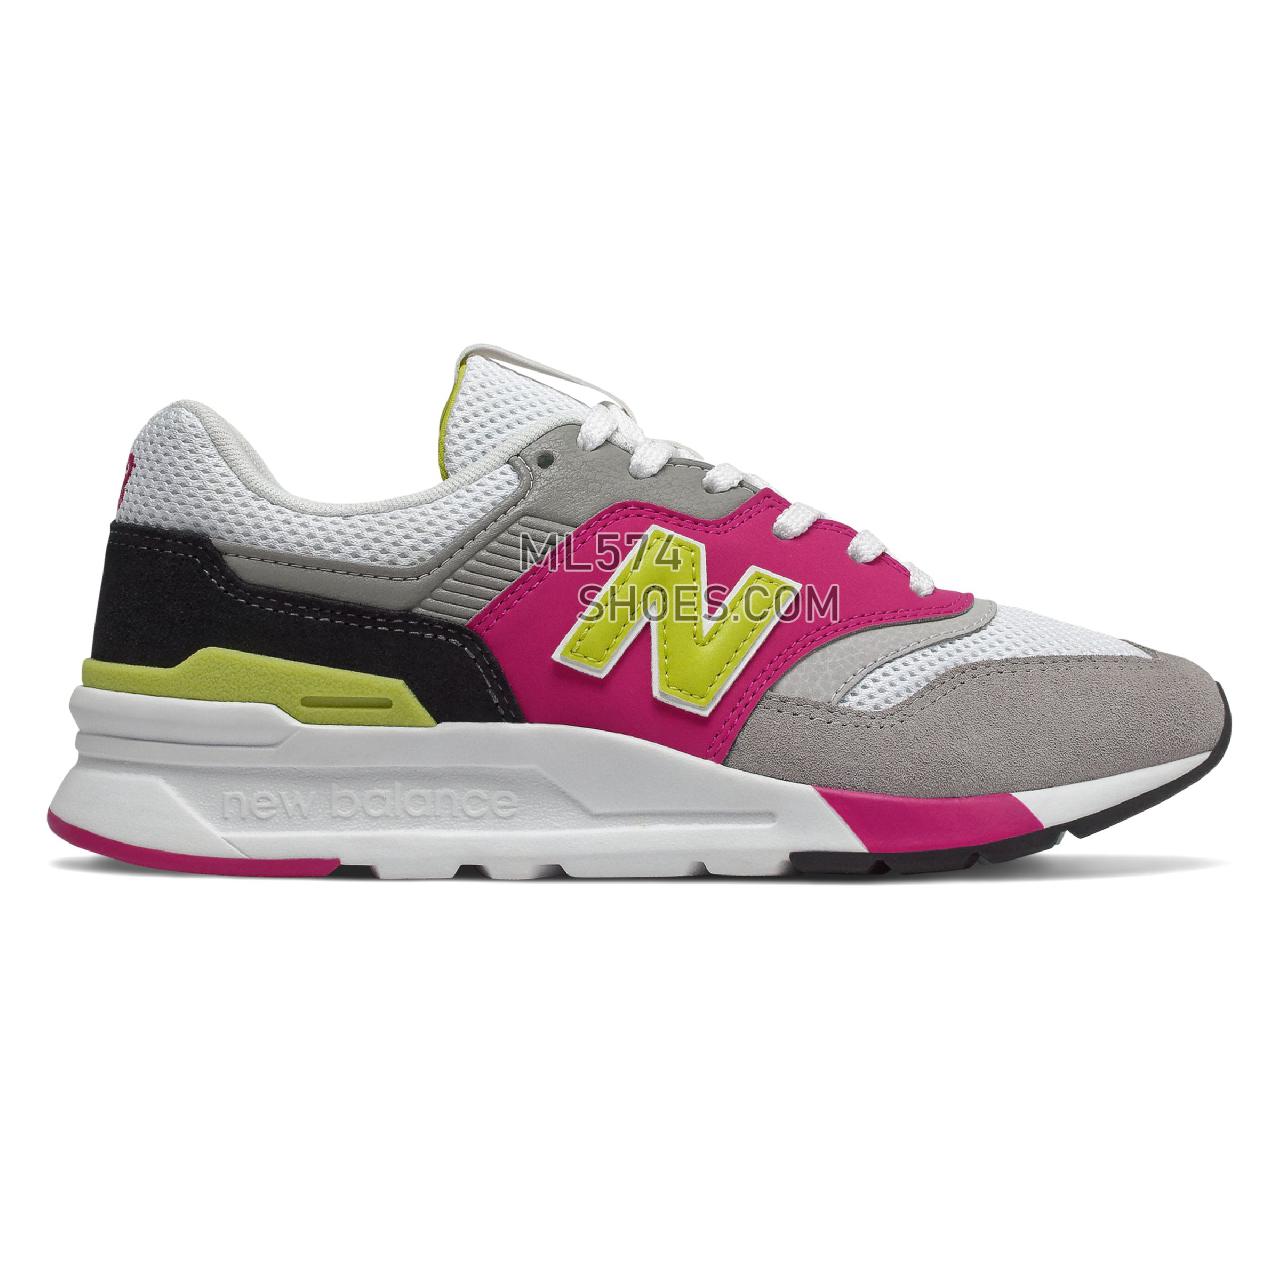 New Balance 997H - Women's Classic Sneakers - White with Pink and Yellow - CW997HNX